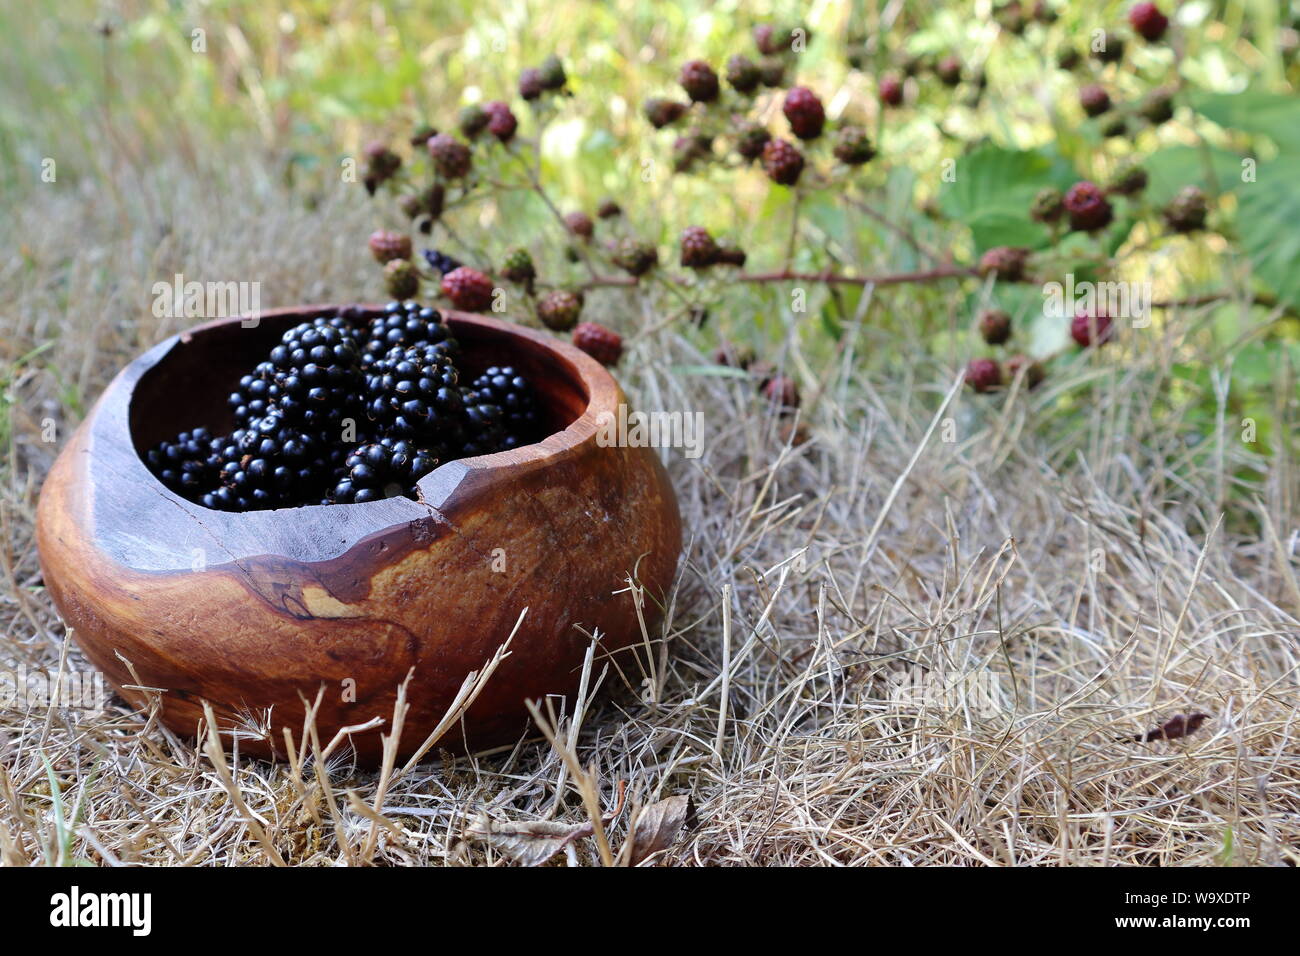 local blackberries harvested in a bowl sitting on dry grass with unripe blackberries brambles in the background Stock Photo